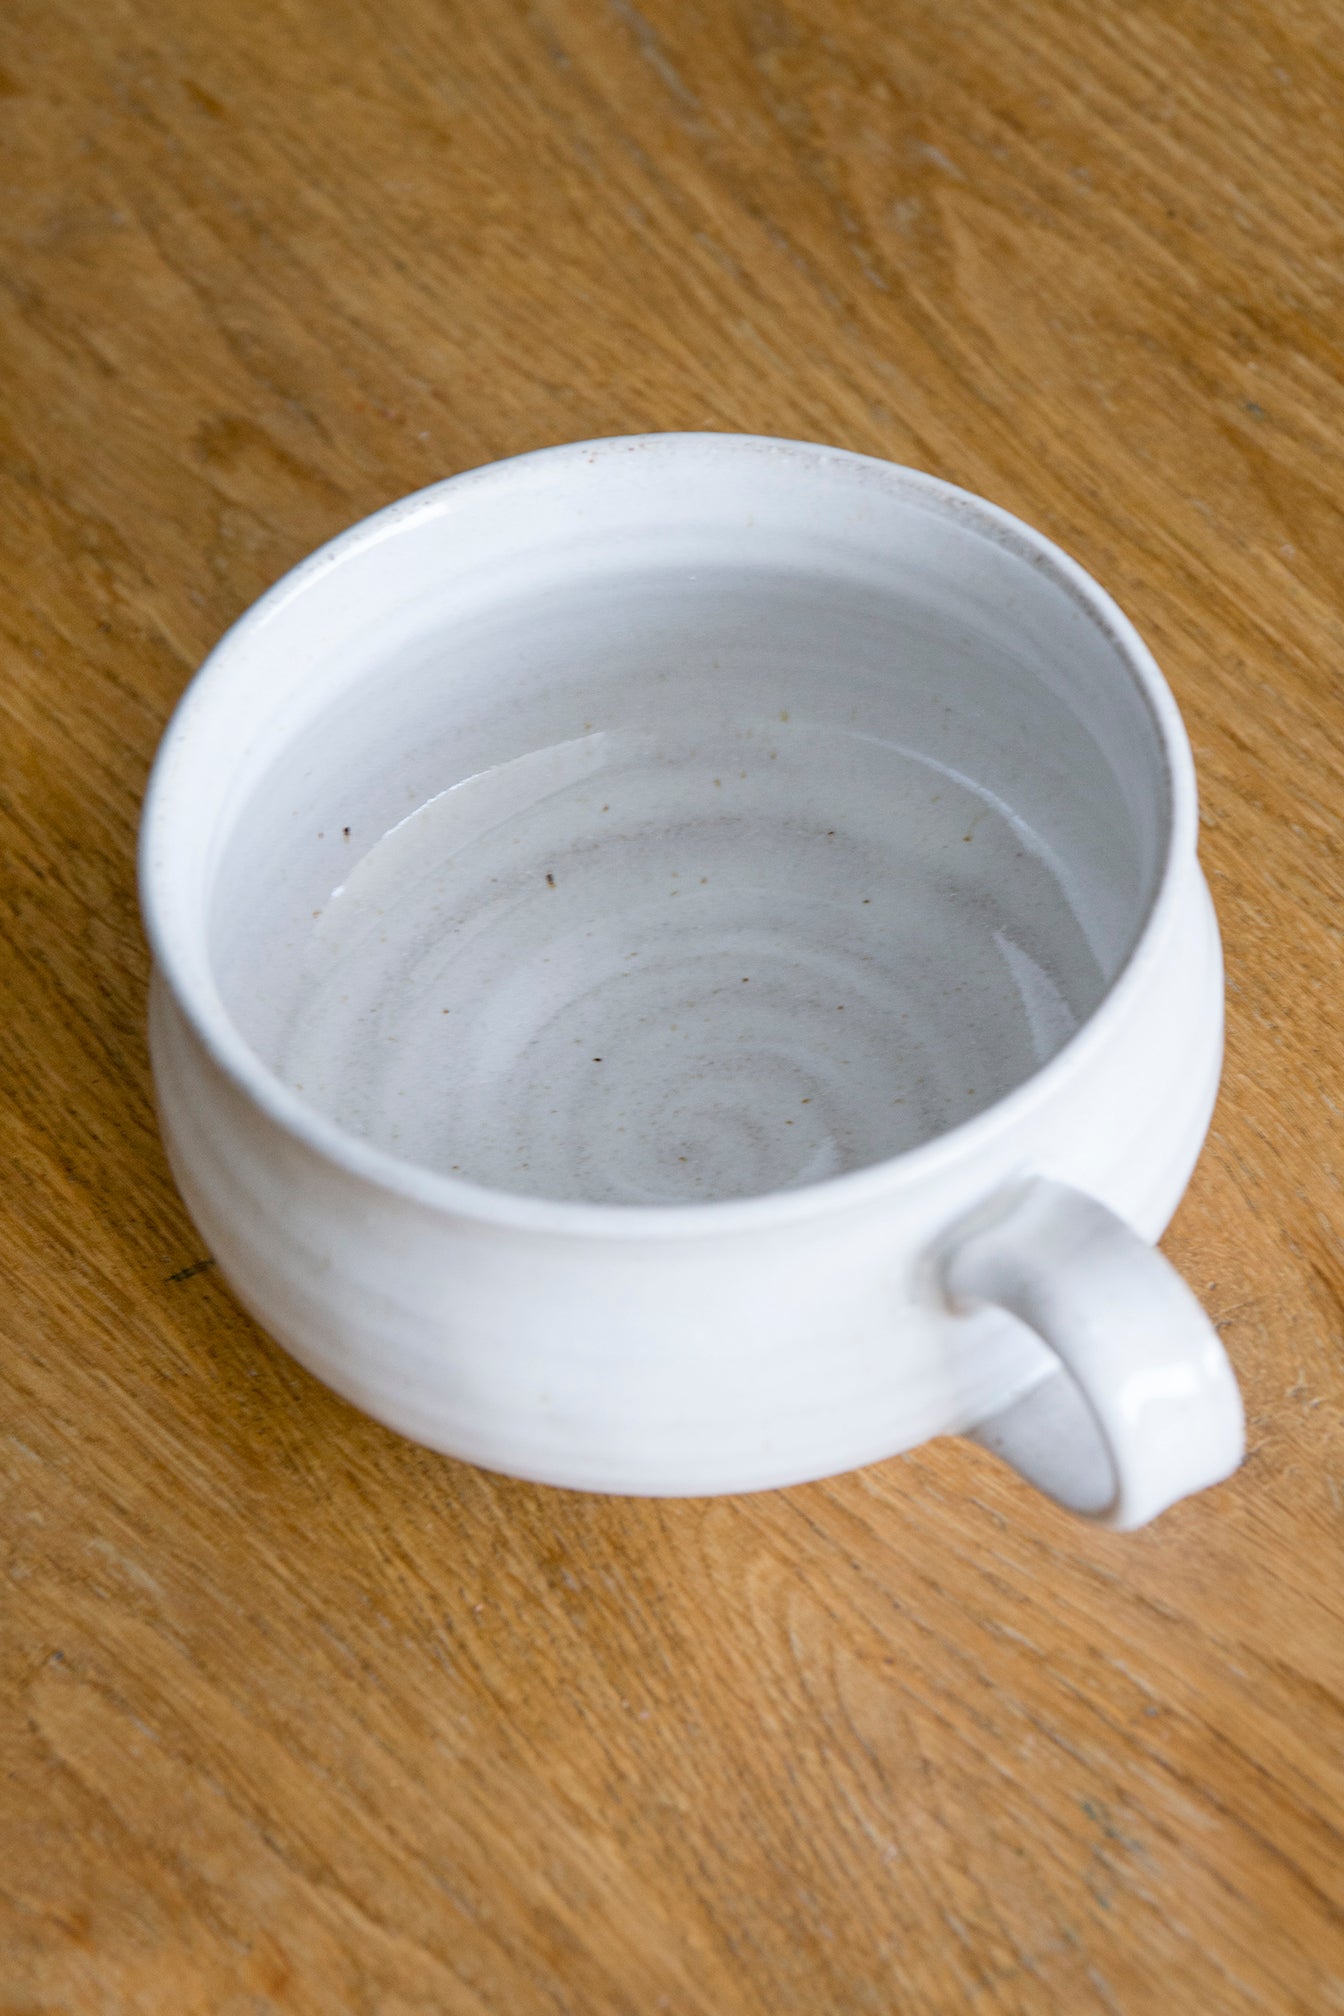 The Best Soup Mugs for 2023 - Best Ceramic Soup Mugs